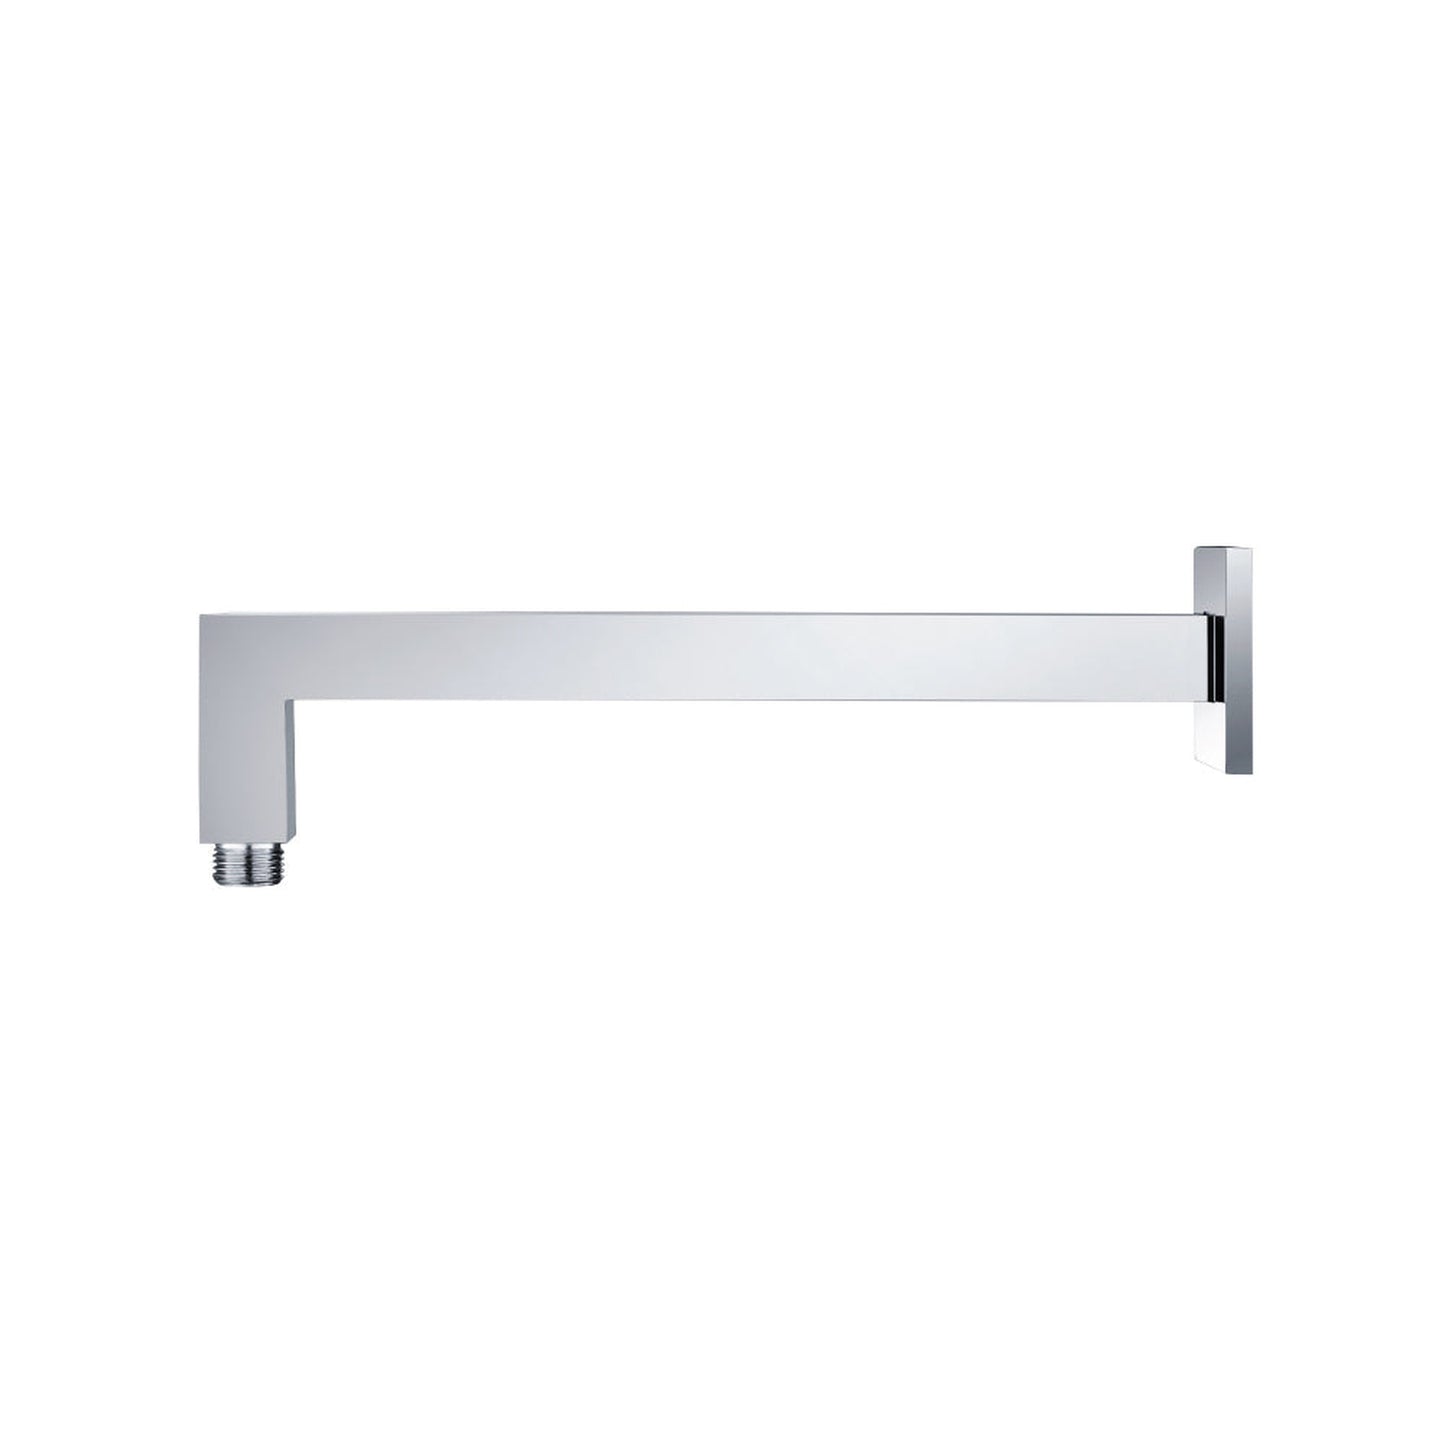 Isenberg Universal Fixtures 12" Chrome Solid Brass Wall-Mounted Shower Arm With Angled Extension and Square Sliding Flange